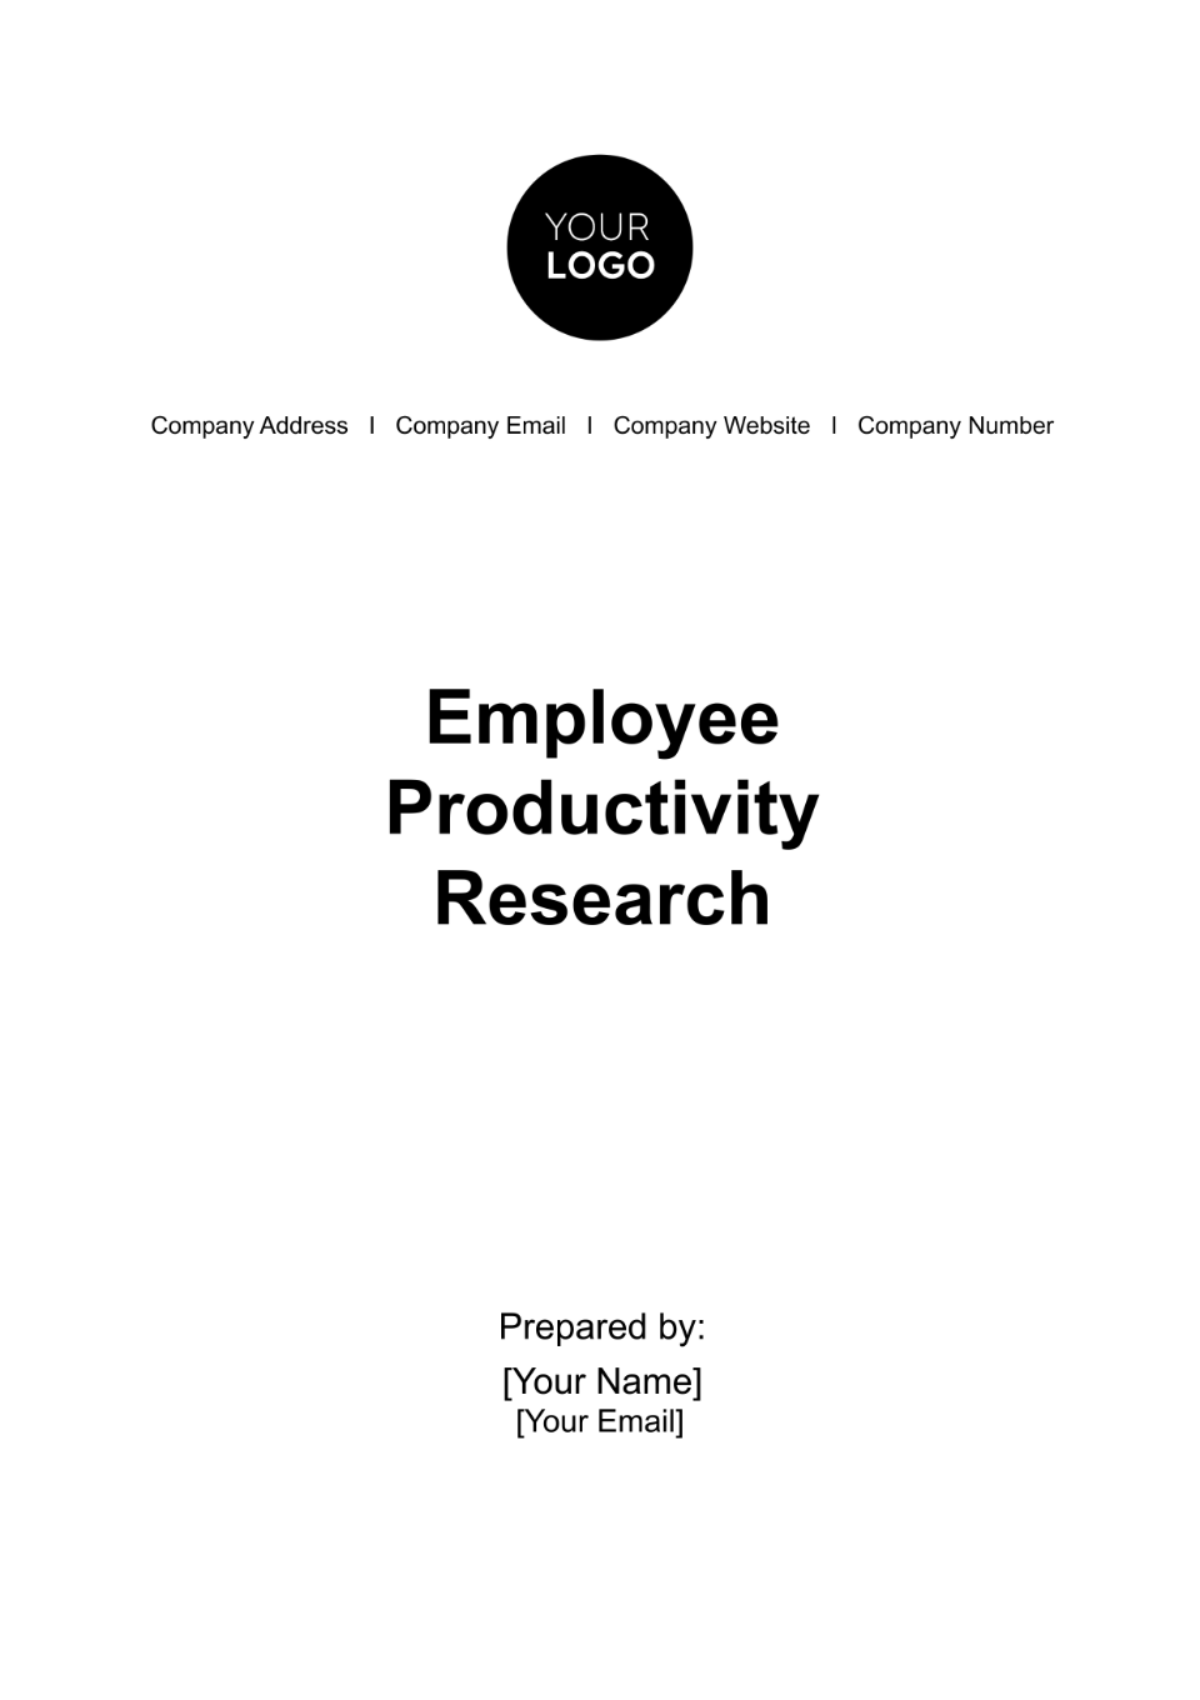 Employee Productivity Research HR Template